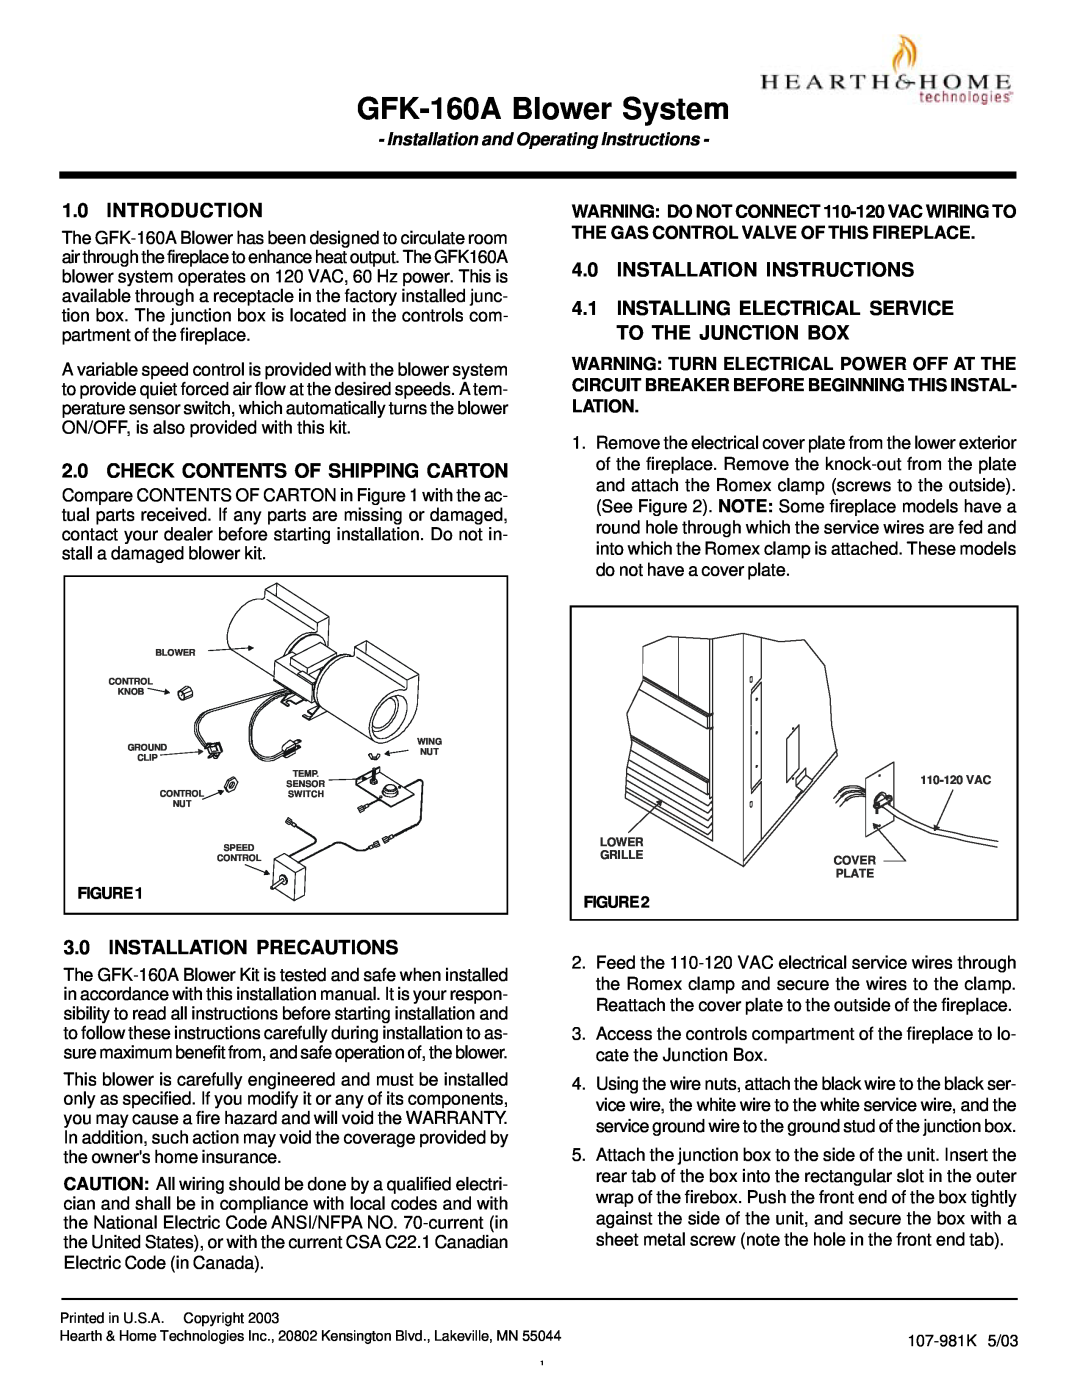 Hearth and Home Technologies GFK-160A installation instructions Introduction, Check Contents Of Shipping Carton 